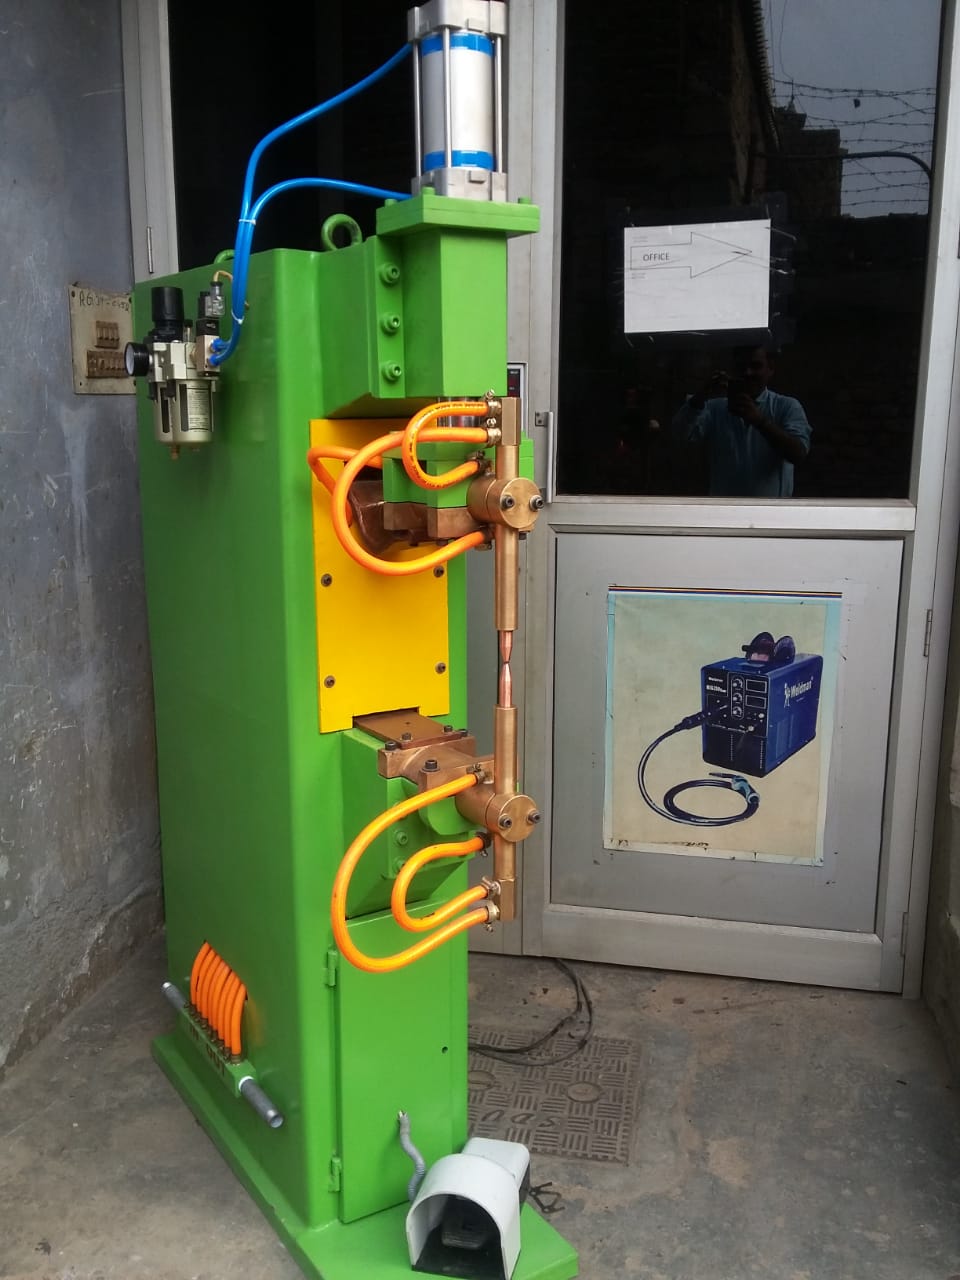 Spot Projection Welding Machine Manufacturer in Faridabad